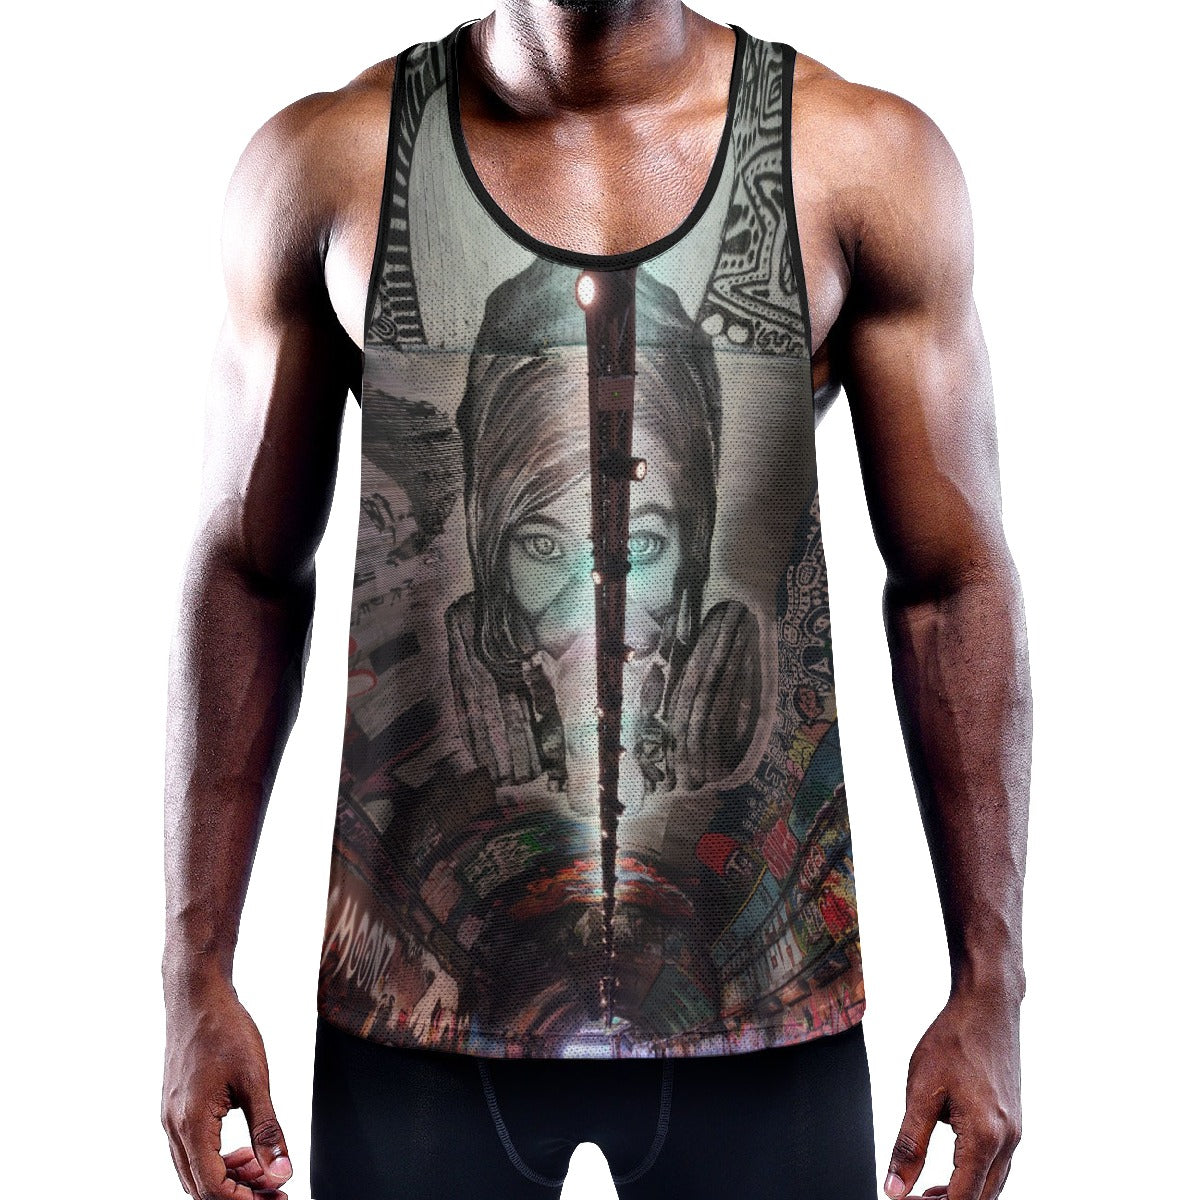 Streets of London Tank Top